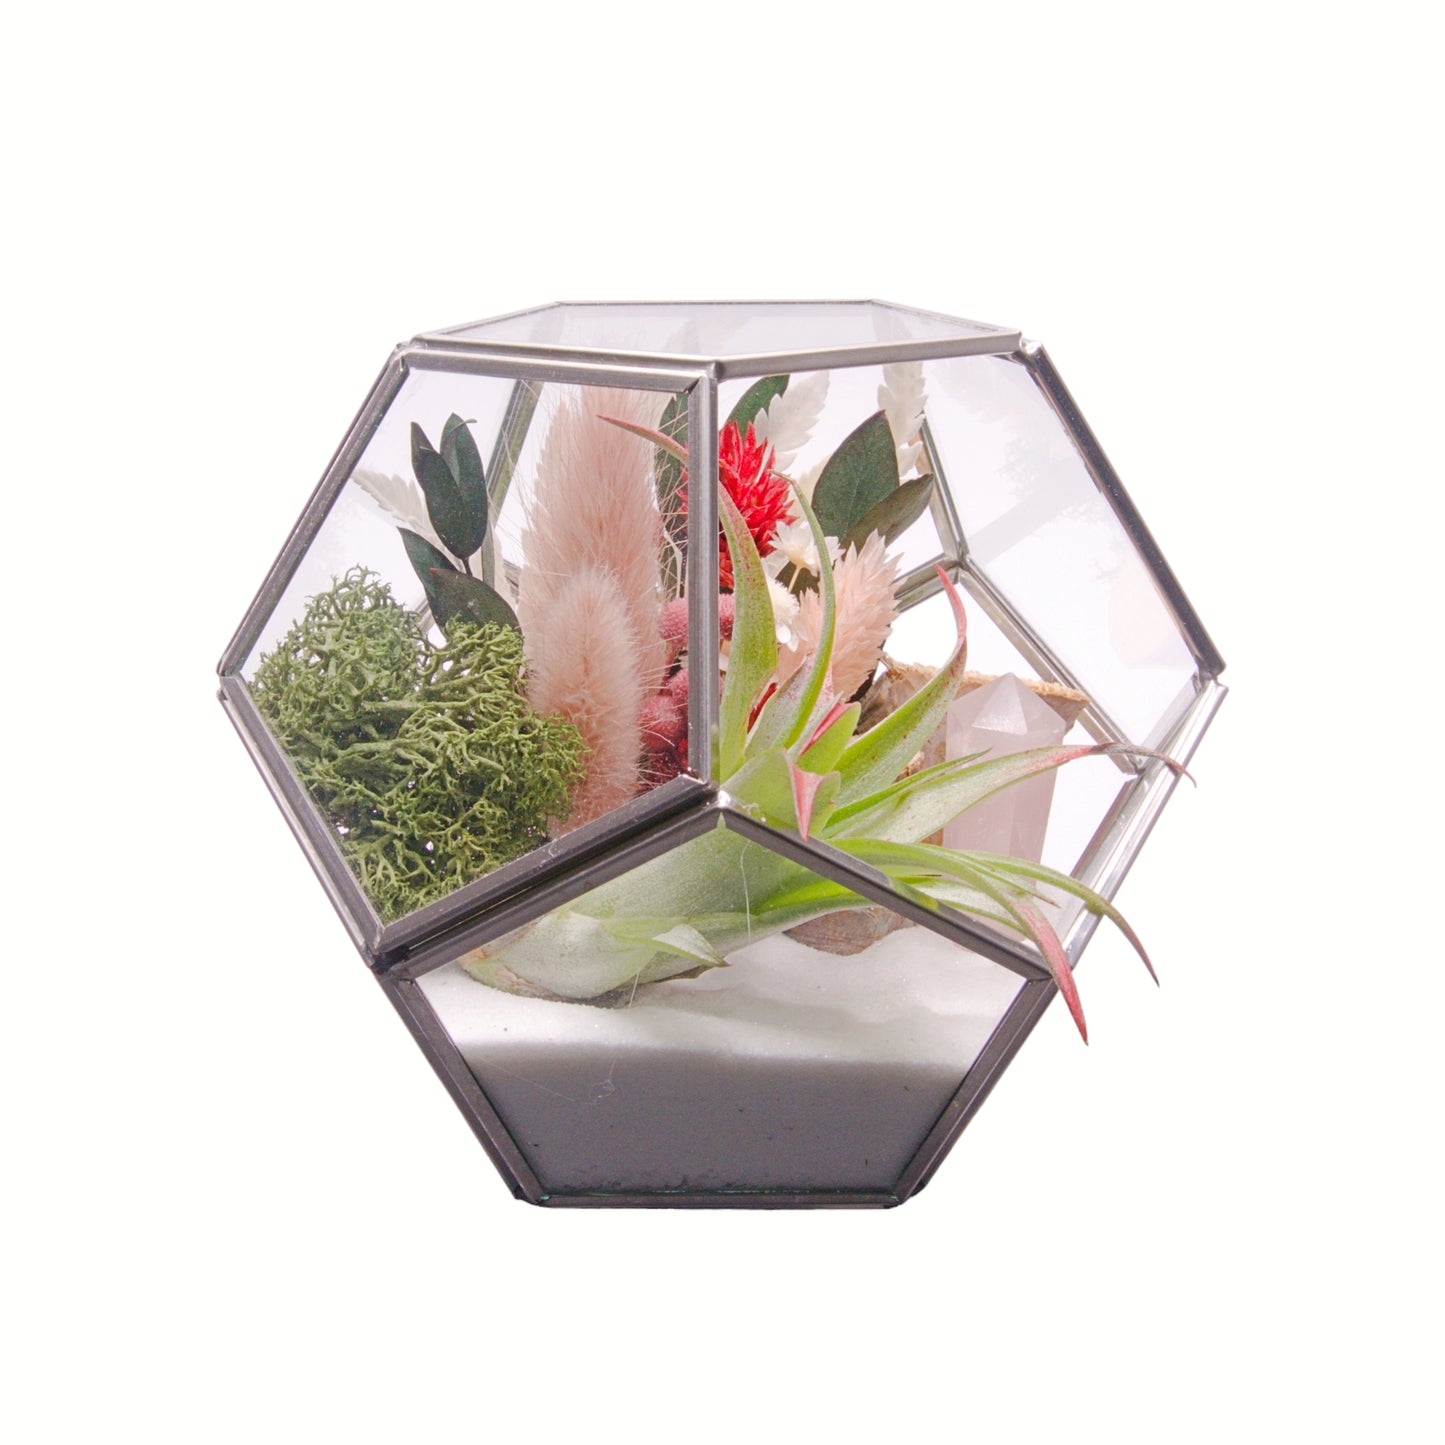 Silver Victorian bowl airplant terrarium with sand, dried flowers, wood, moss and a rose quartz crystal point